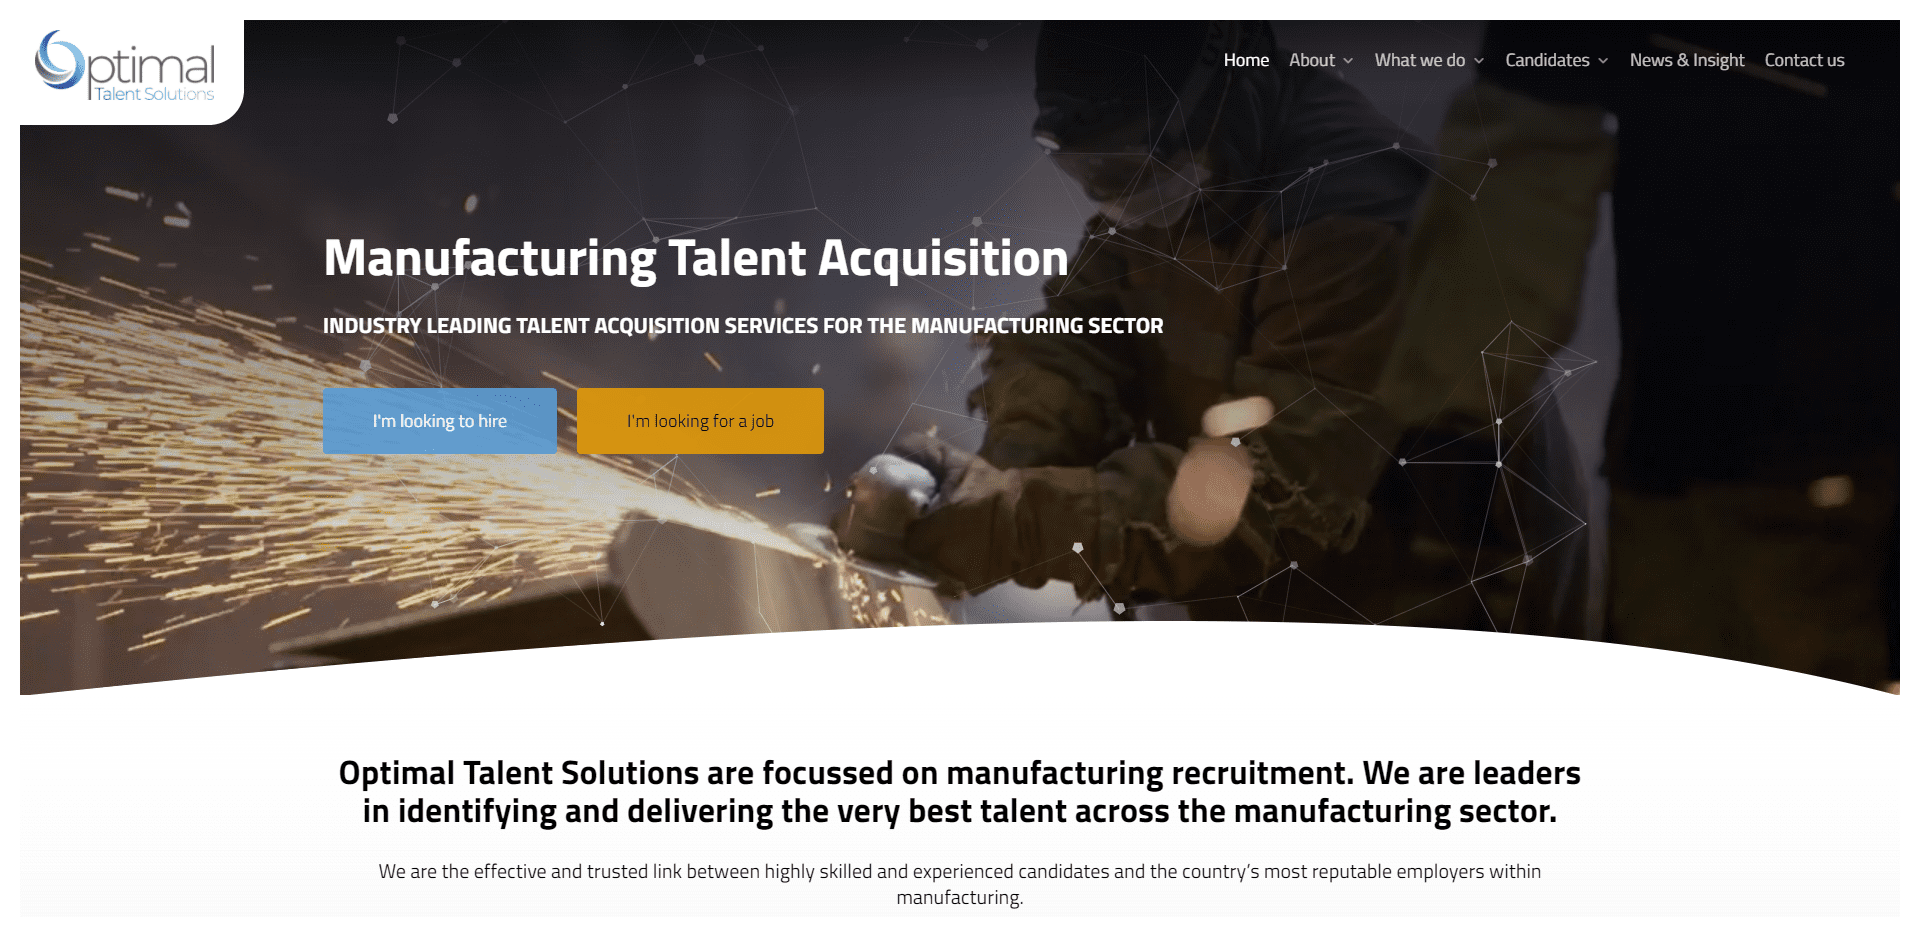 Optimal Talent Solutions